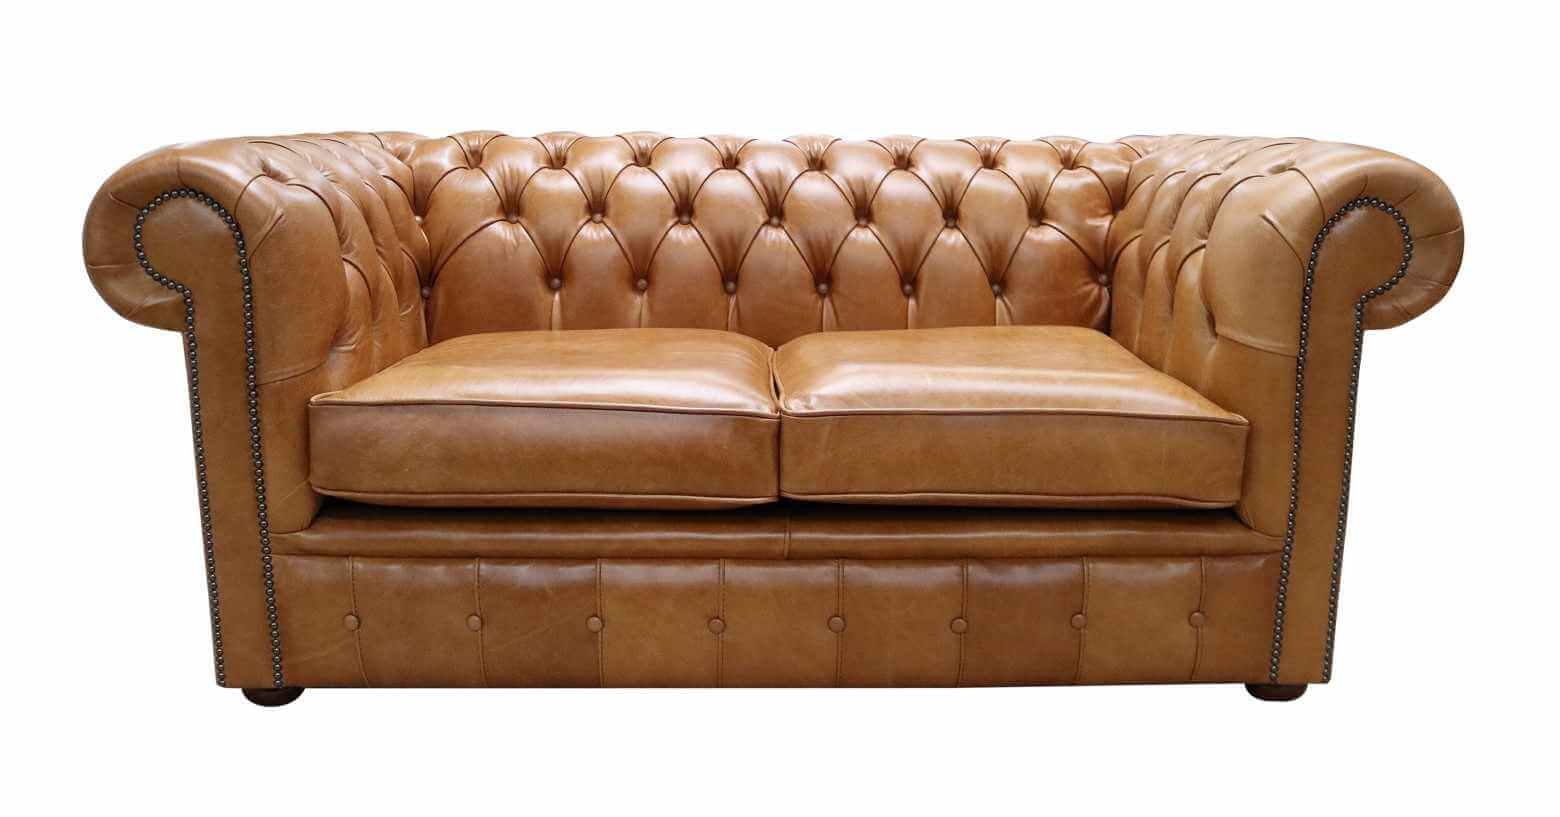 Stylish Seating Discover Chesterfield Sofas at Dunelm Stores  %Post Title